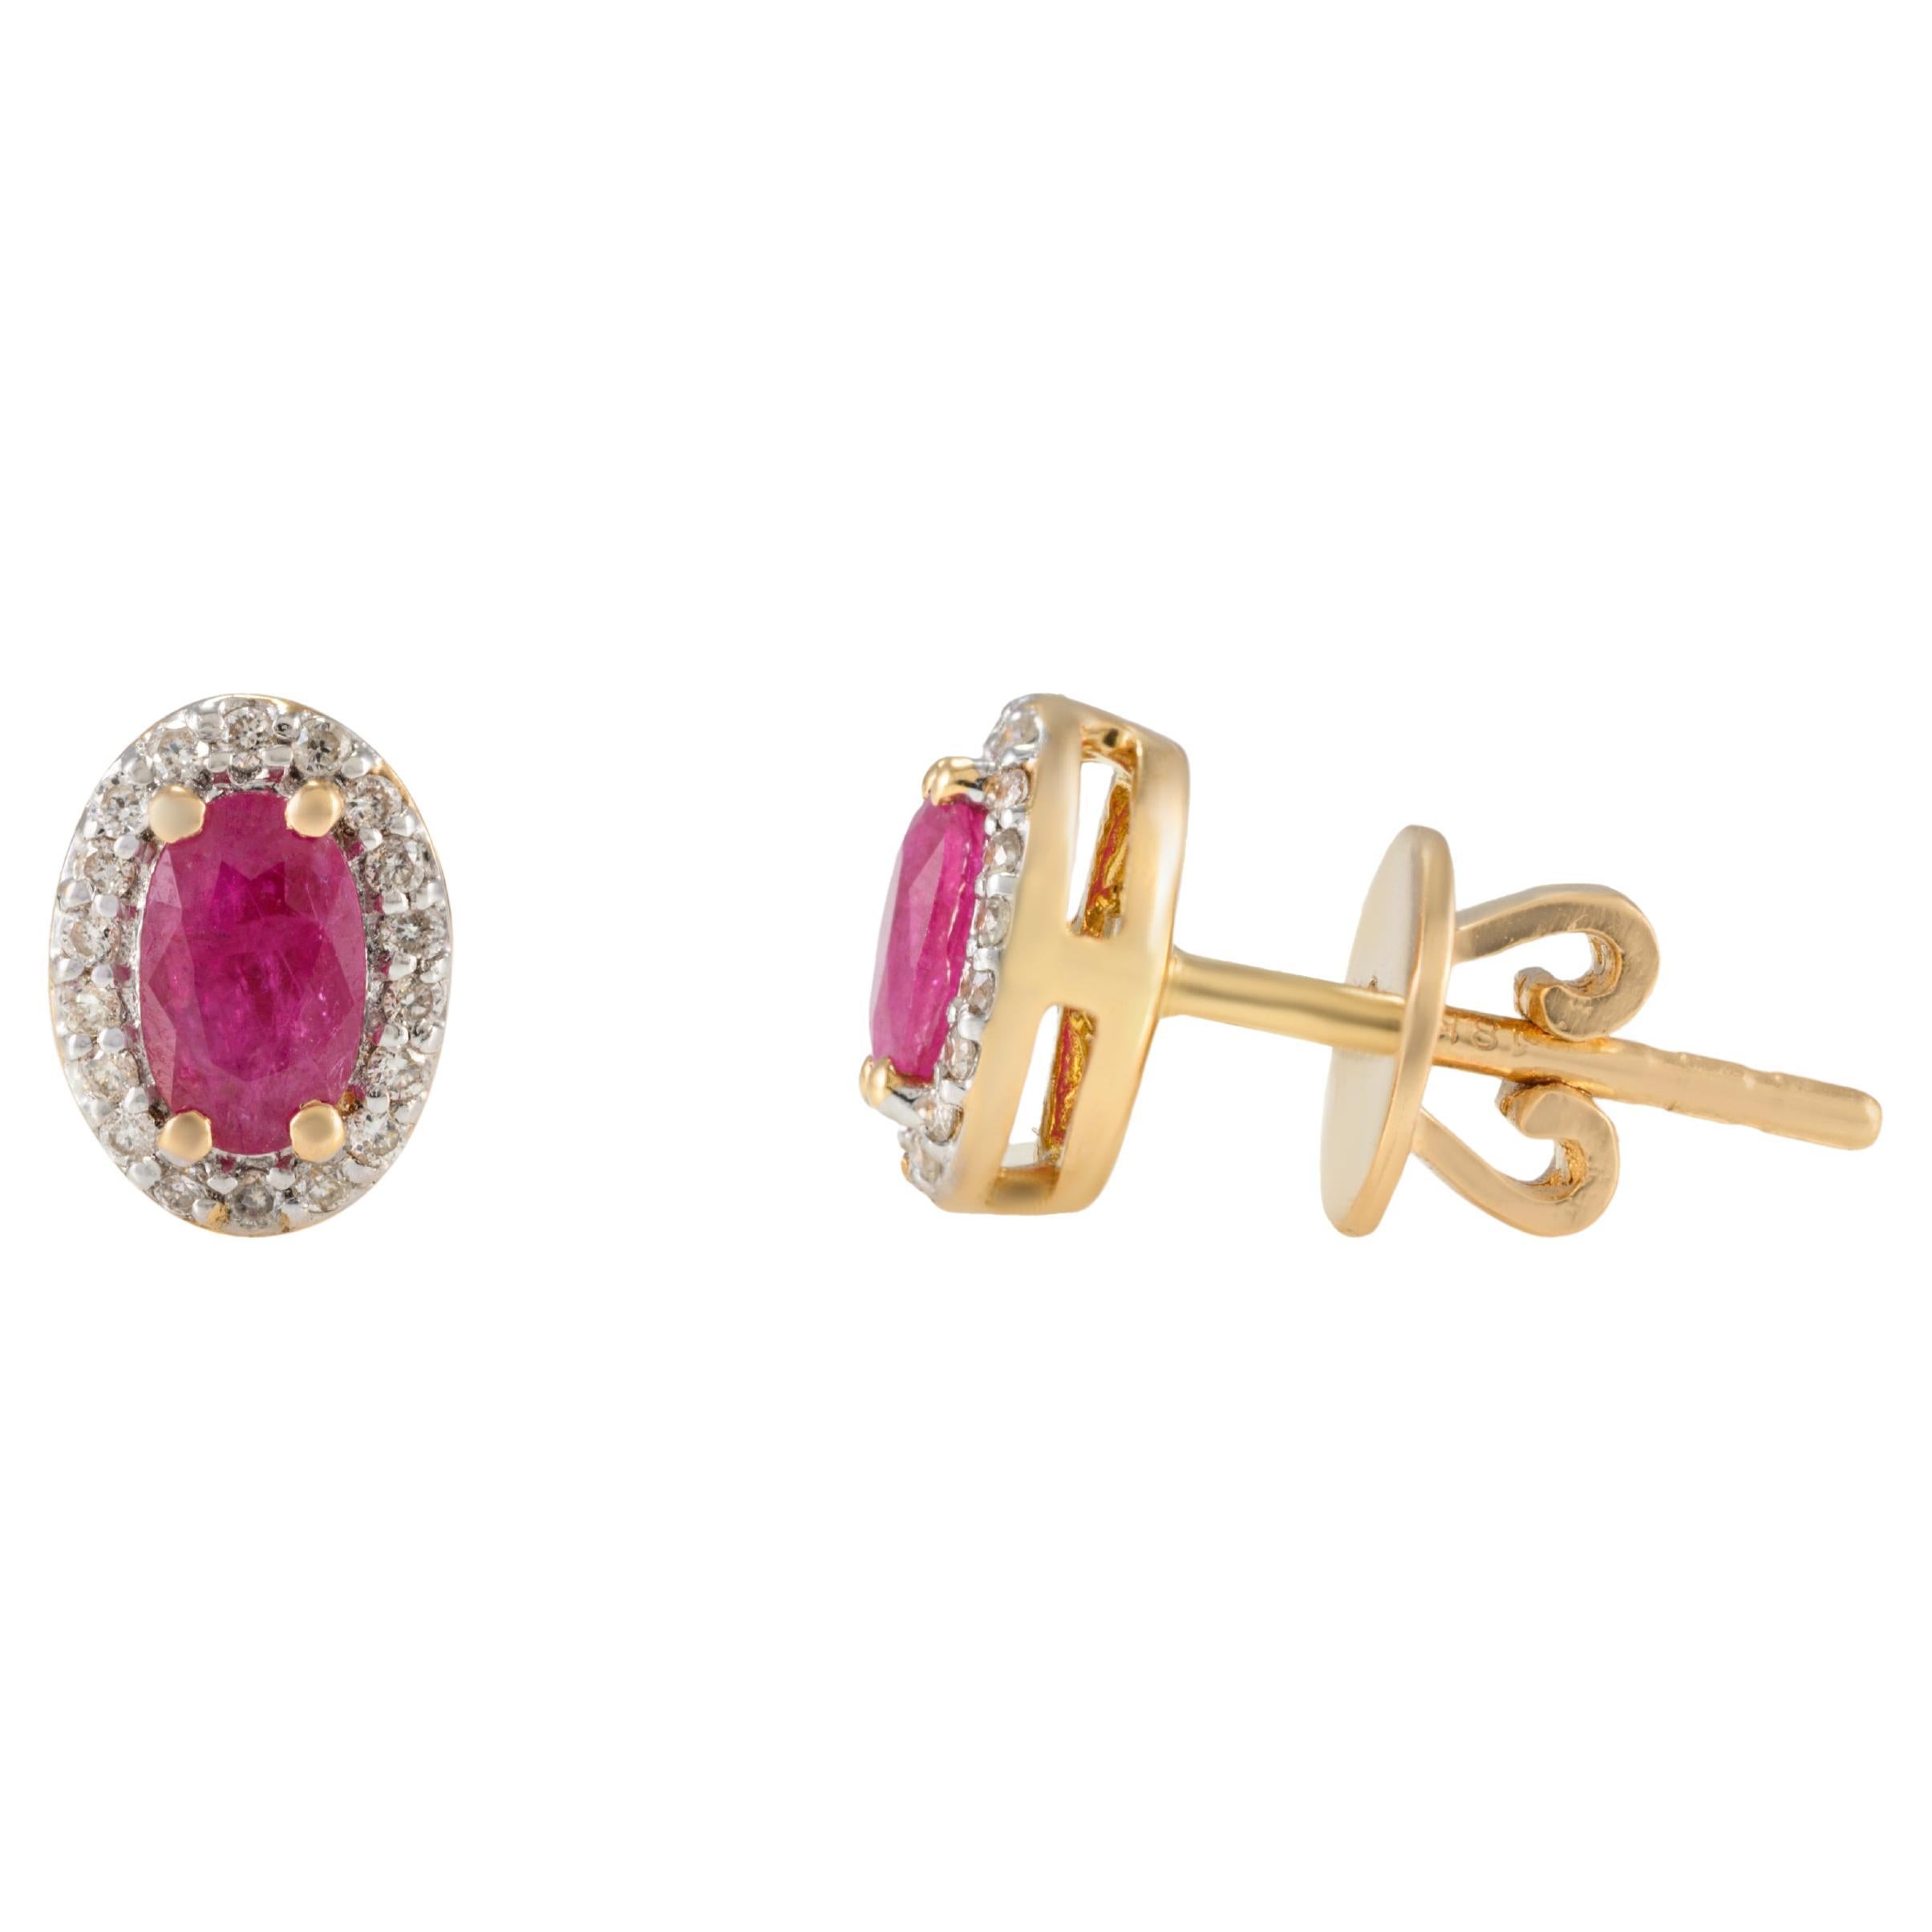 18k Solid Yellow Gold Oval Diamond Halo and Ruby Stud Earrings